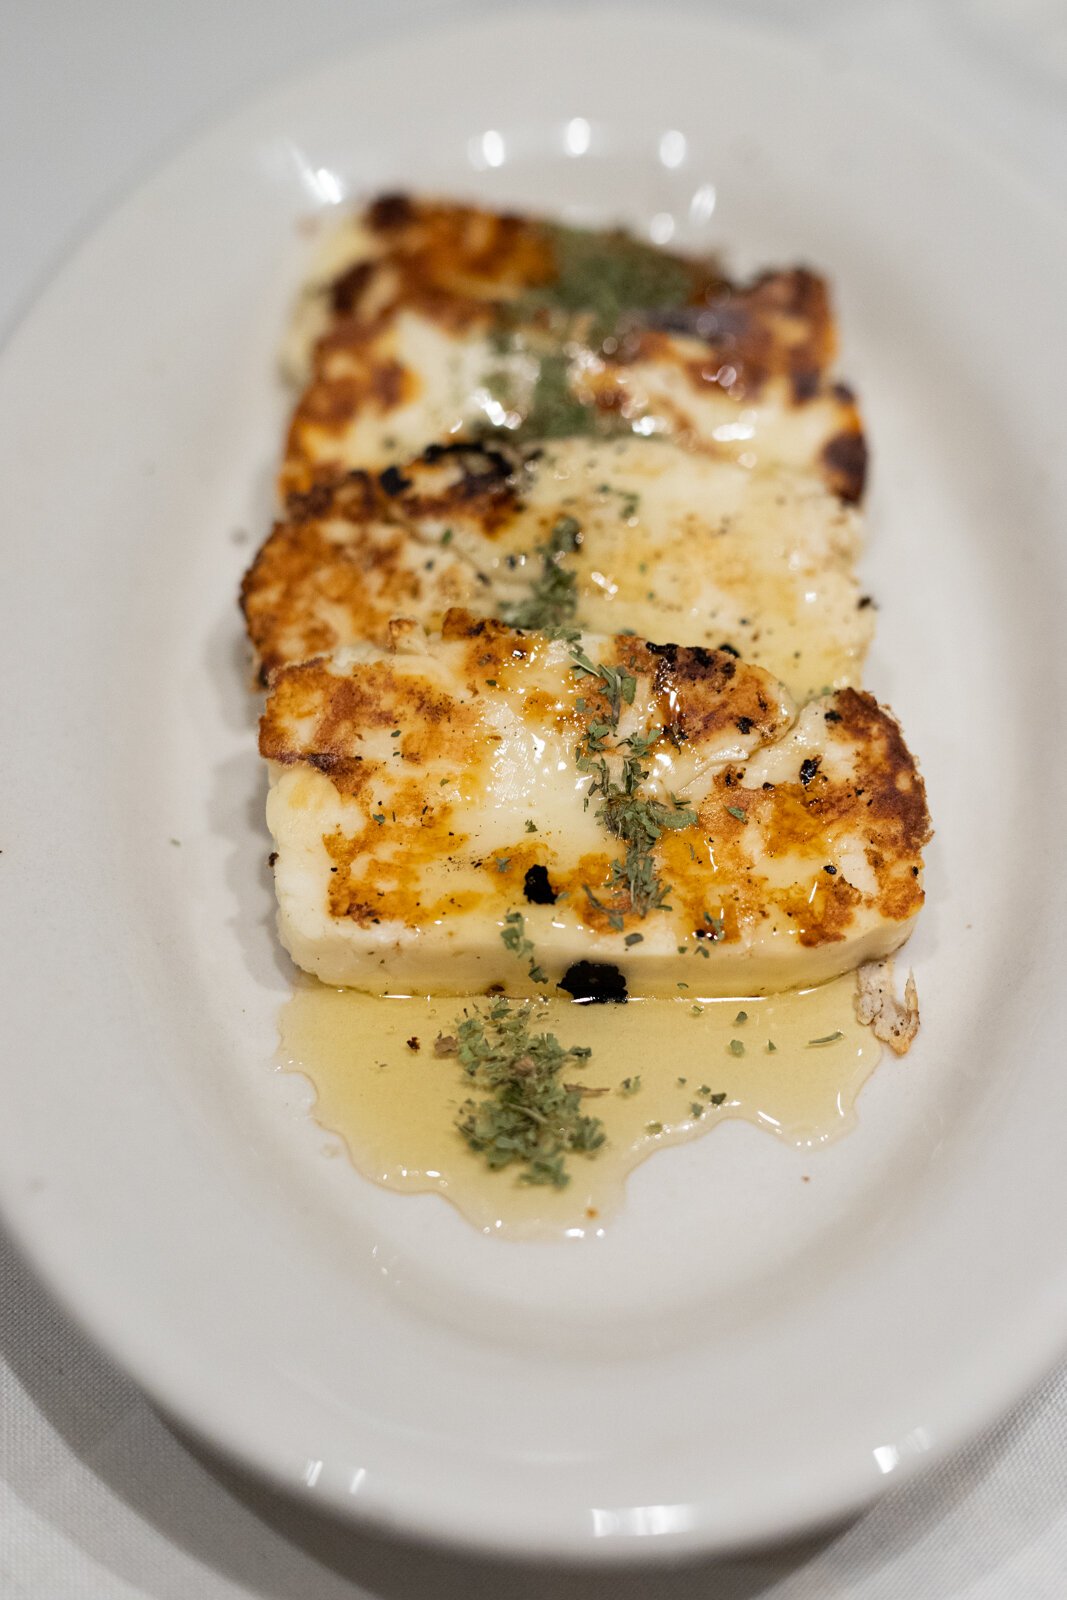 Deema pairs their halloumi with honey and dried mint leaves, which gives the dish a salty-sweet vibe that’s rounded out with a subtle earthiness from the mint—reminiscent of herbal tea.